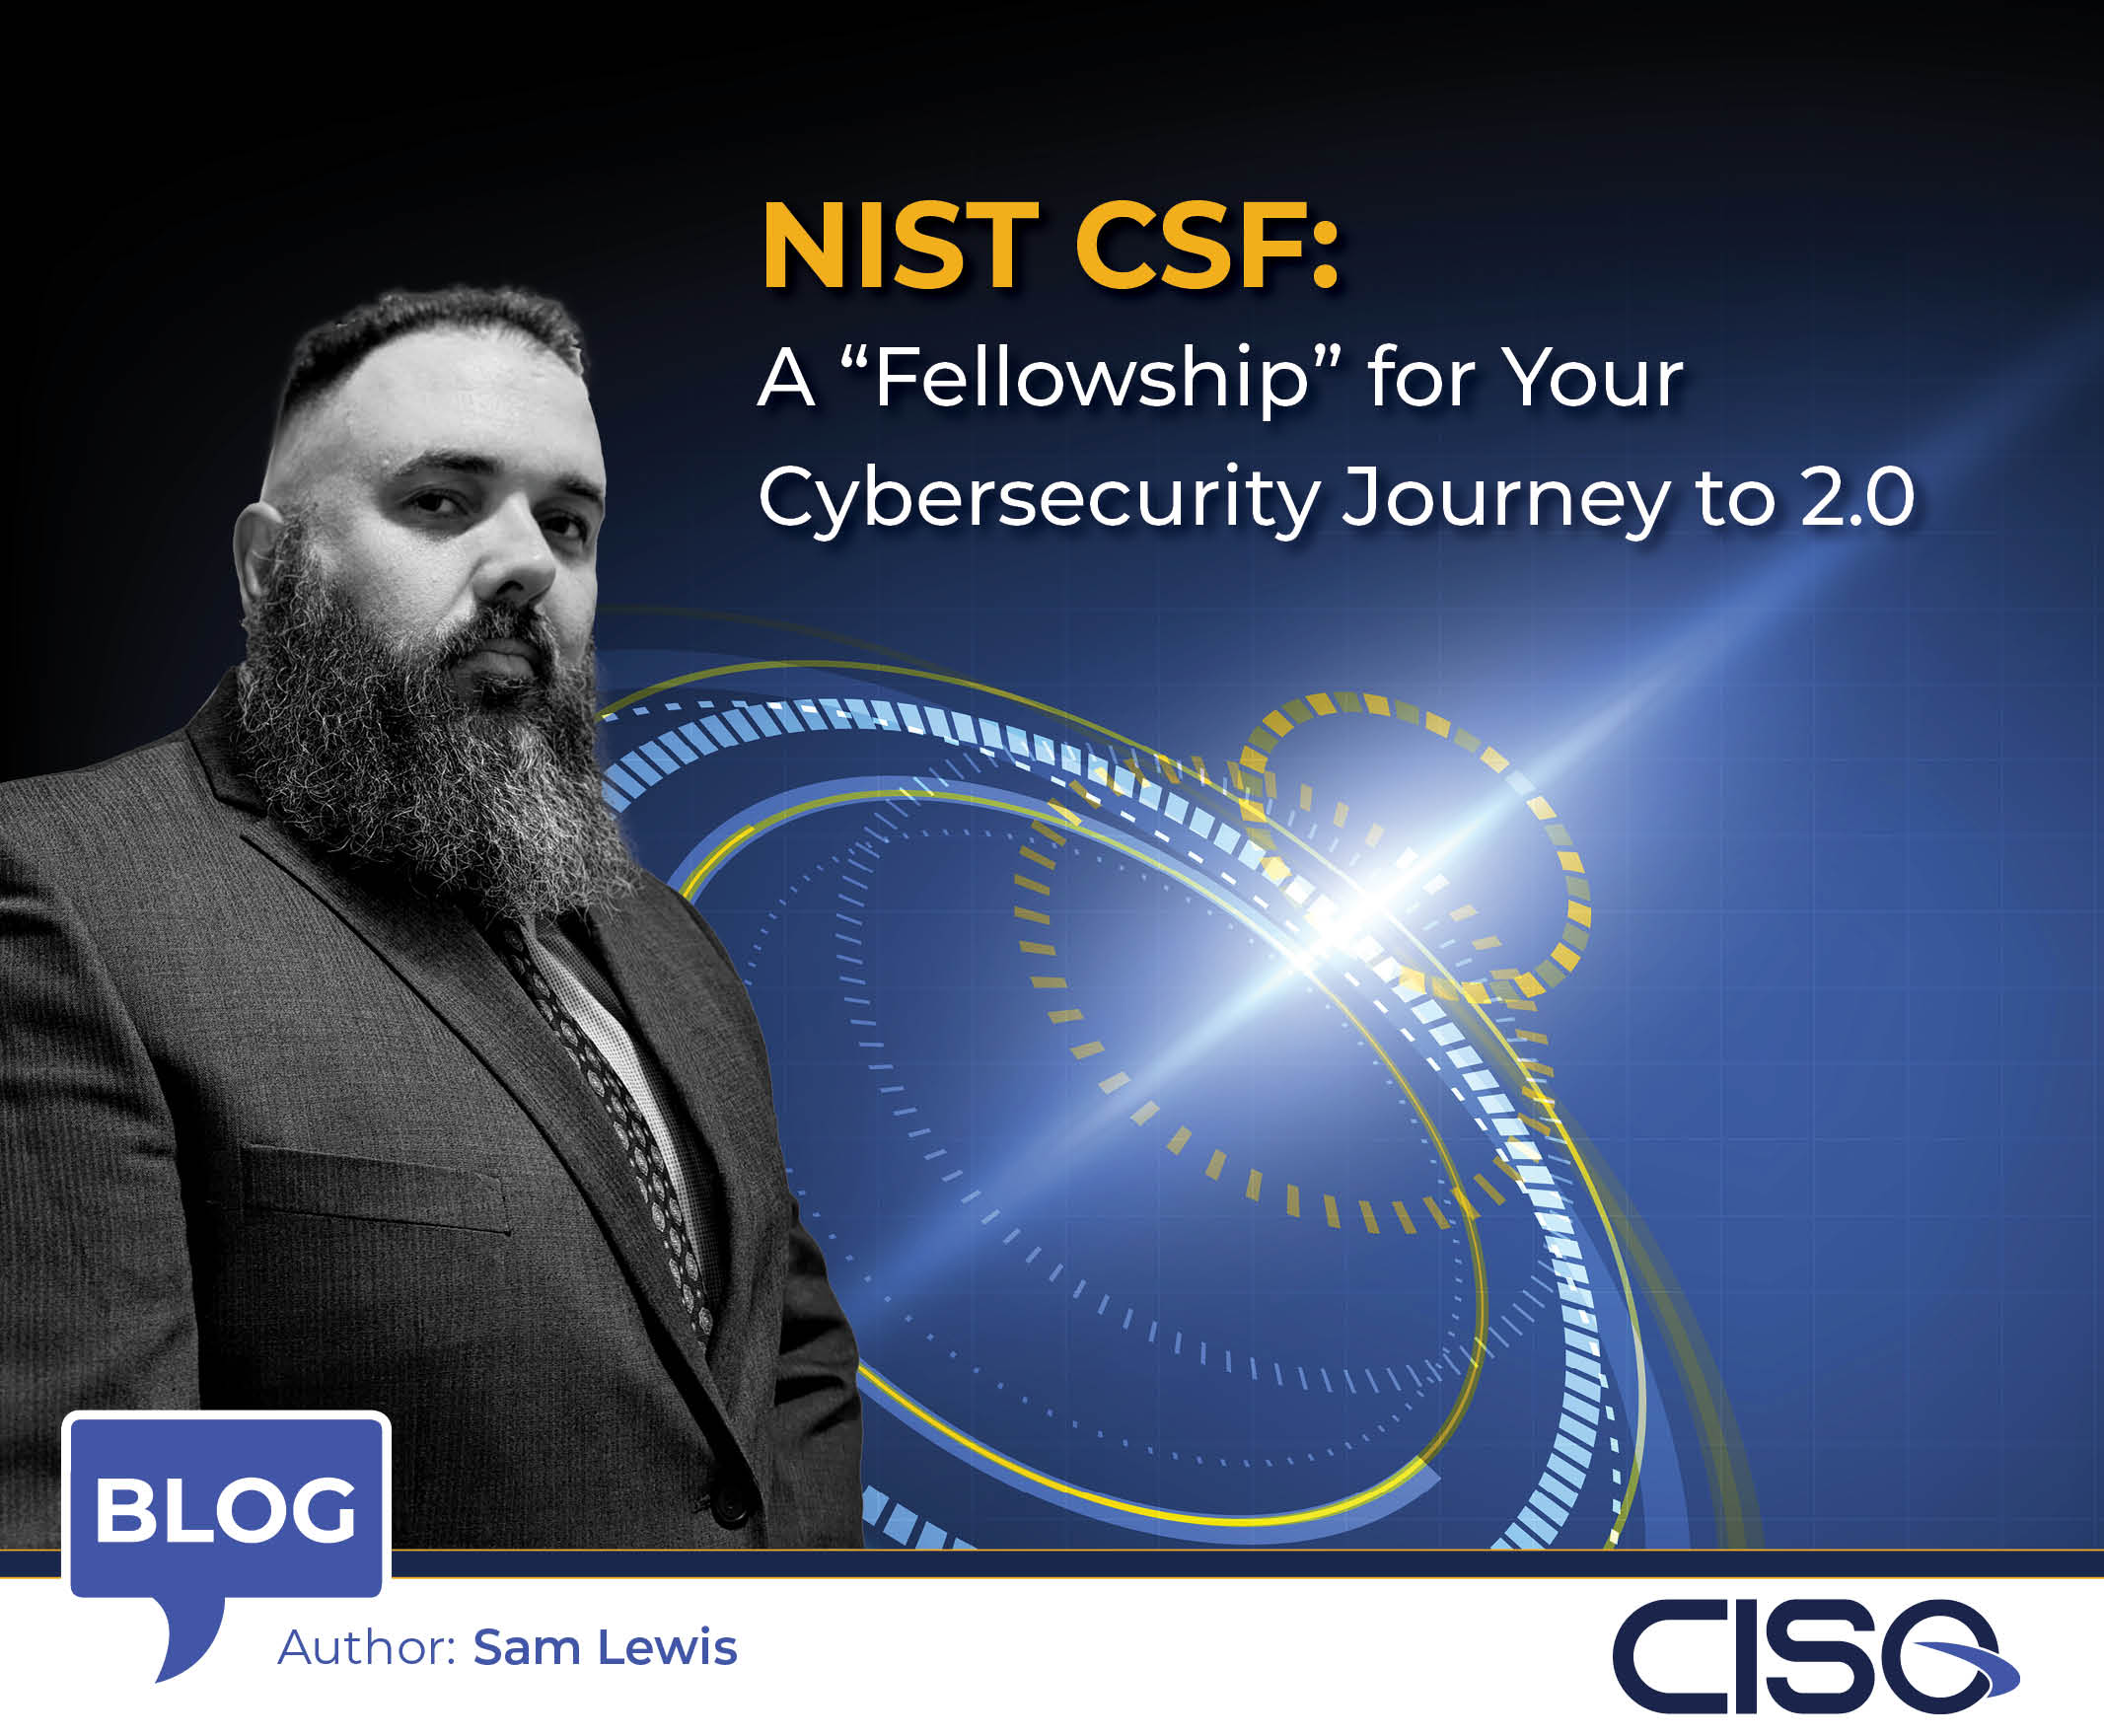 NIST CSF: A “Fellowship” for Your Cybersecurity Journey to 2.0 